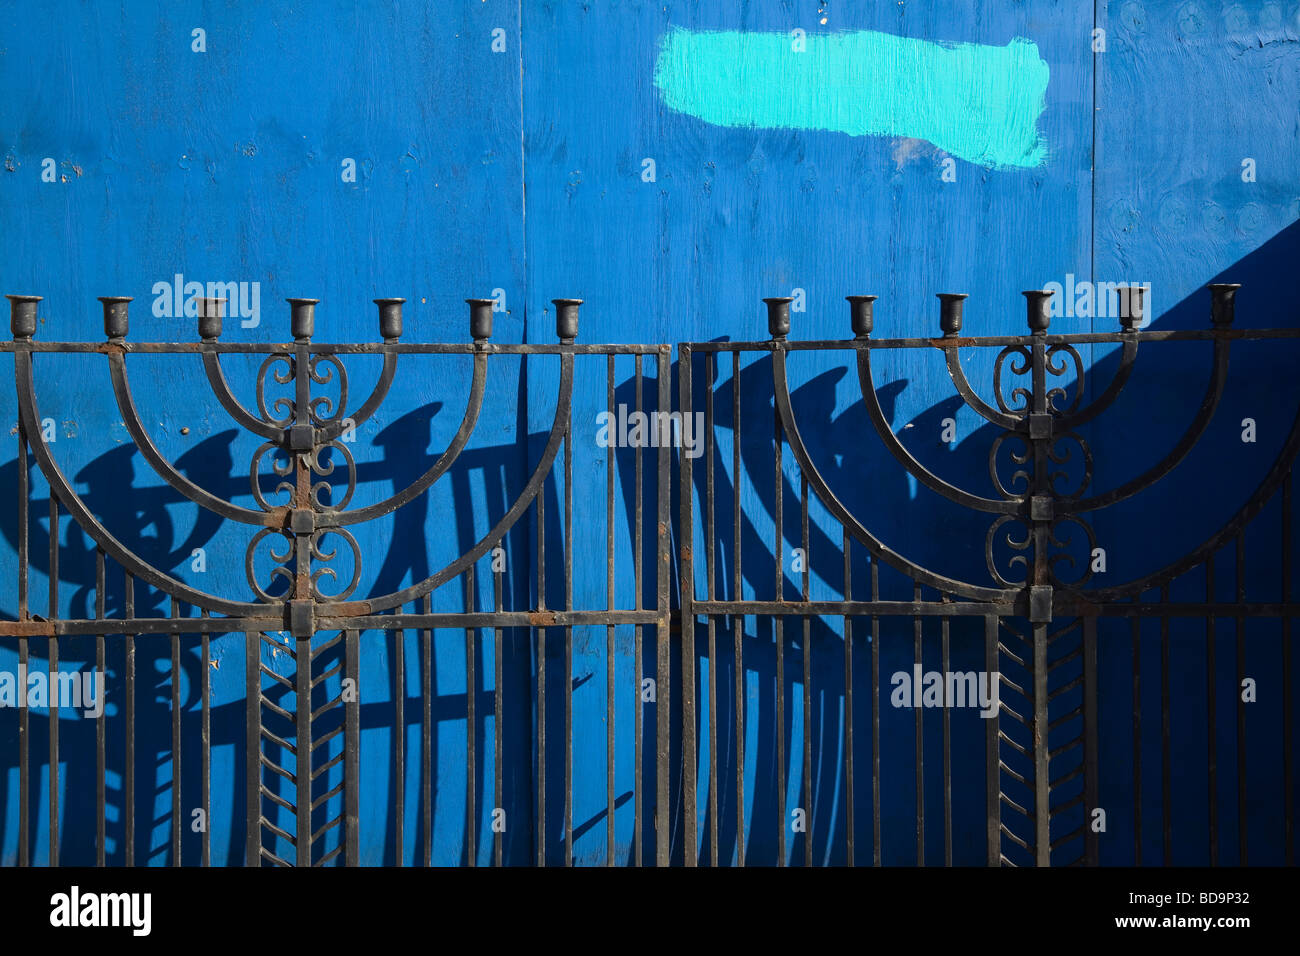 iron gates with the Jewish menorah with dark blue boards in background Stock Photo